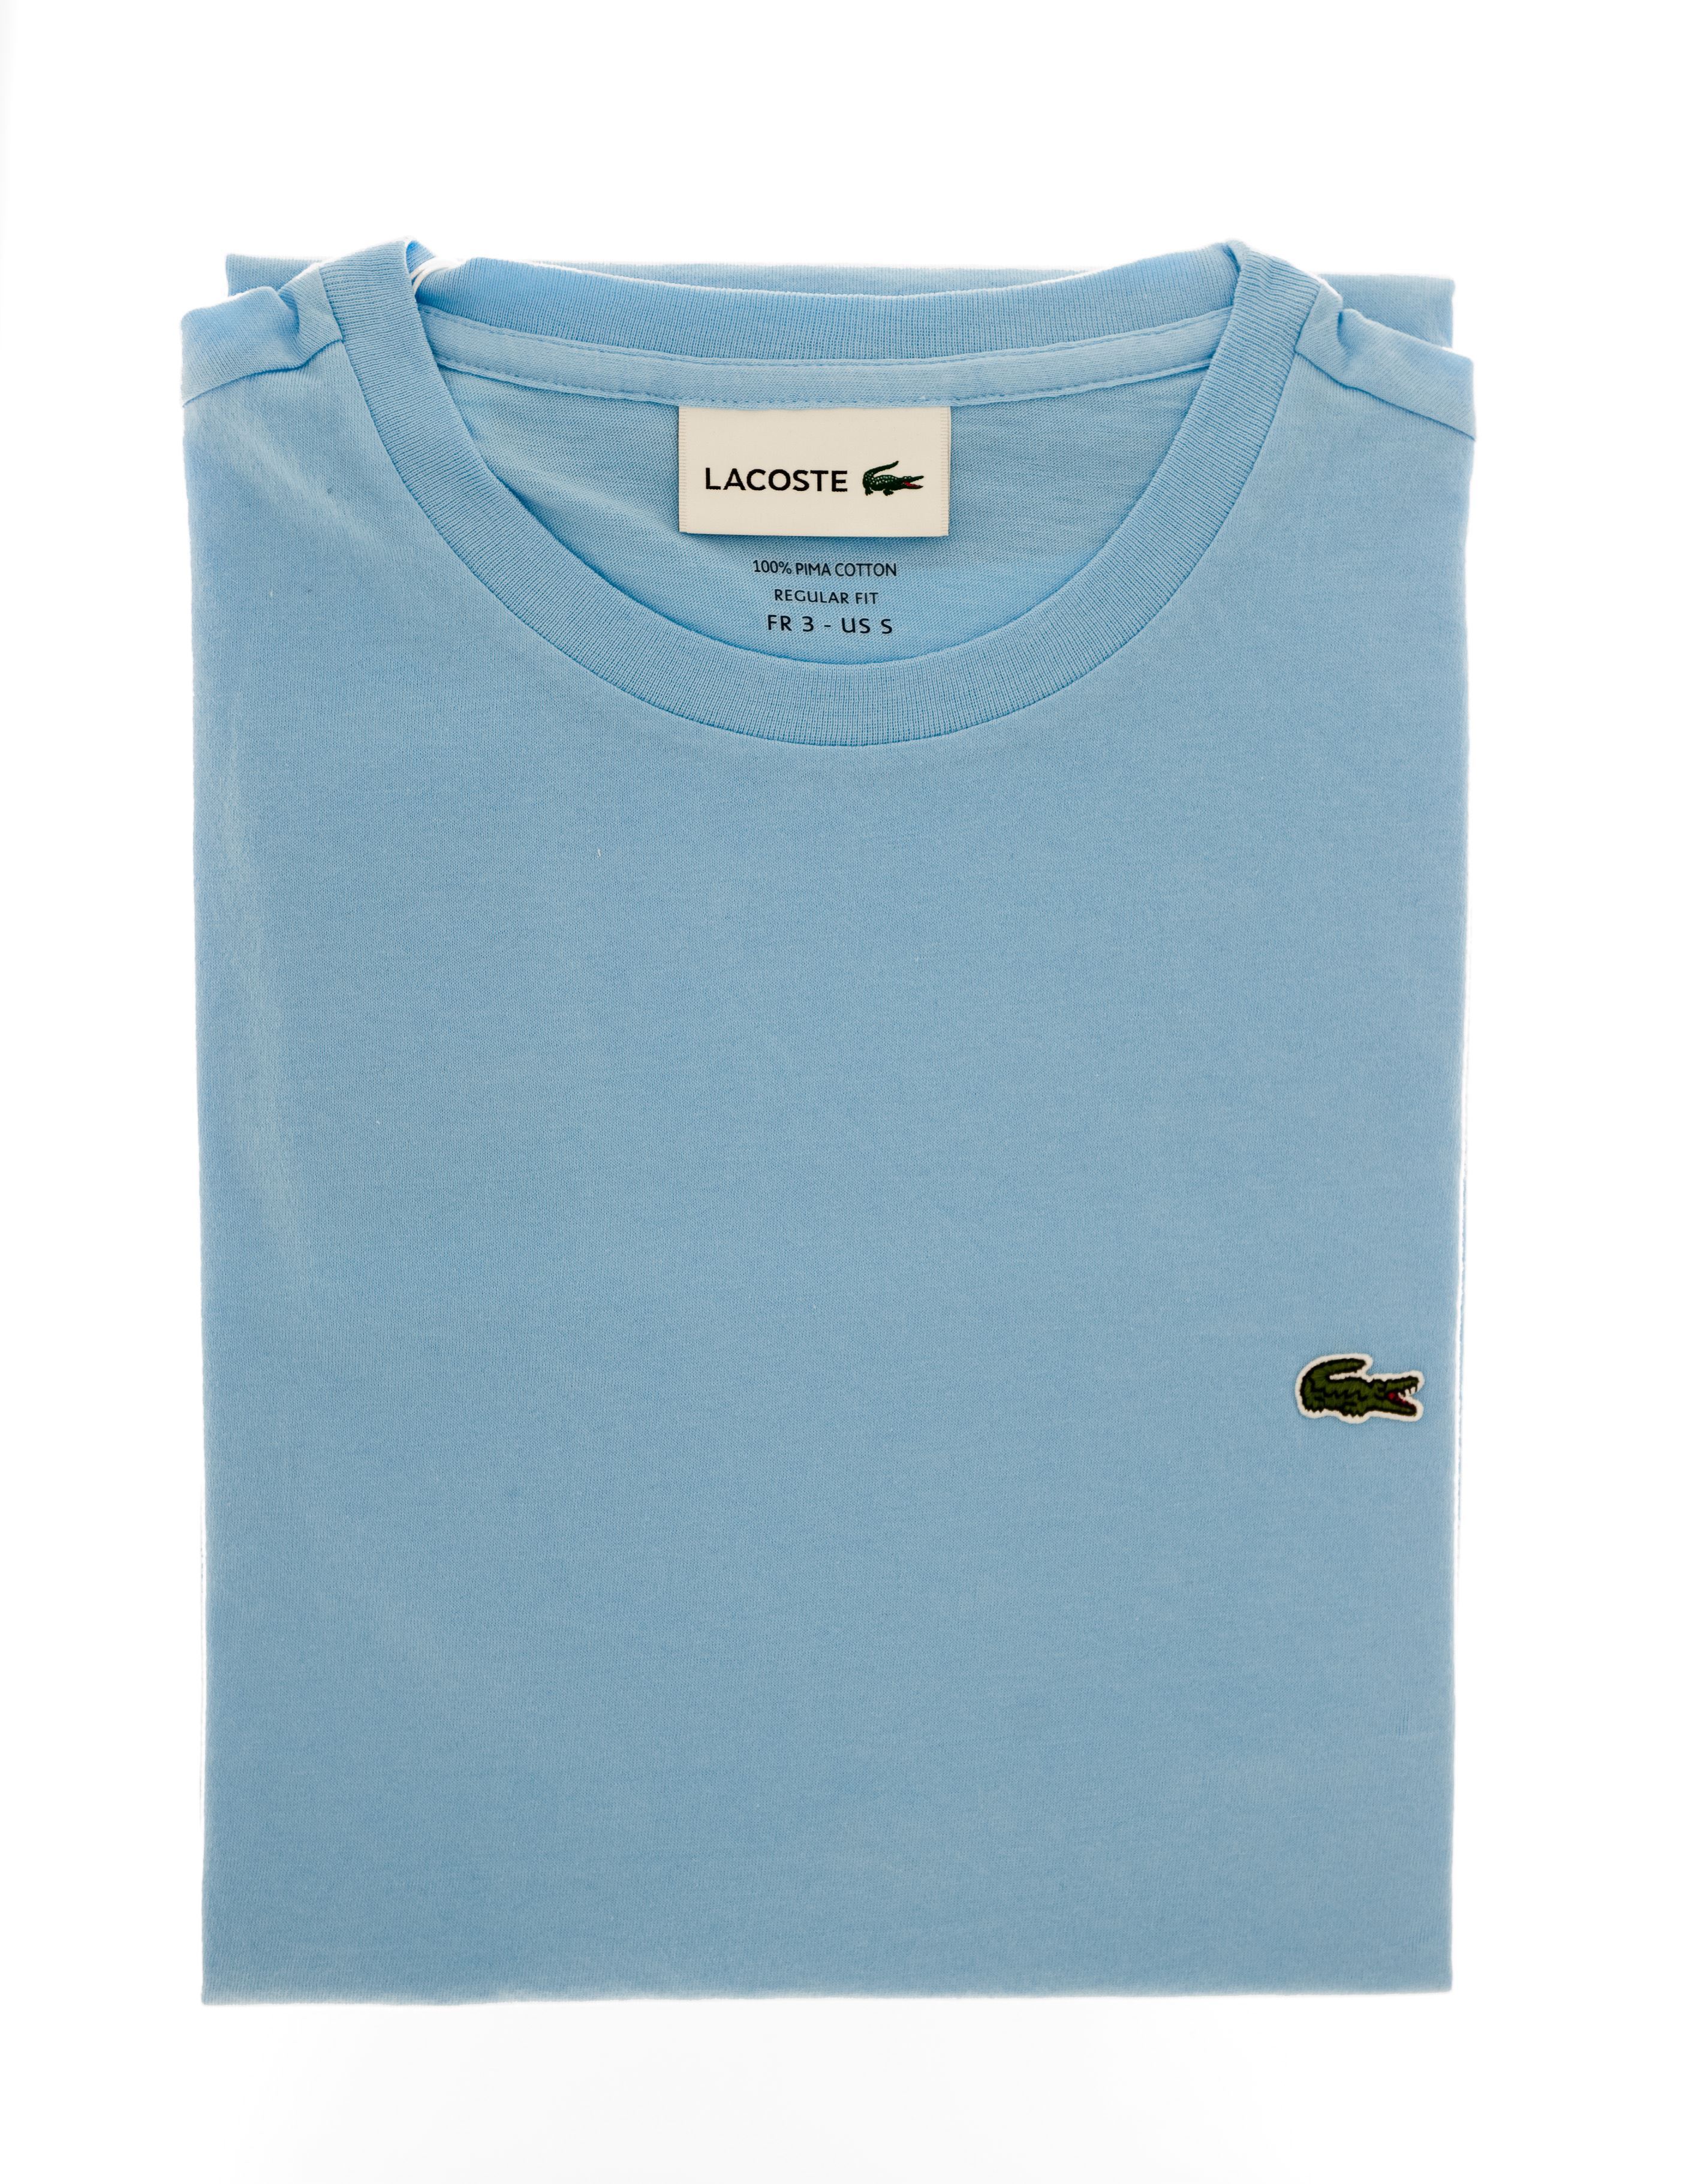 Picture of Jersey cotton t-shirt